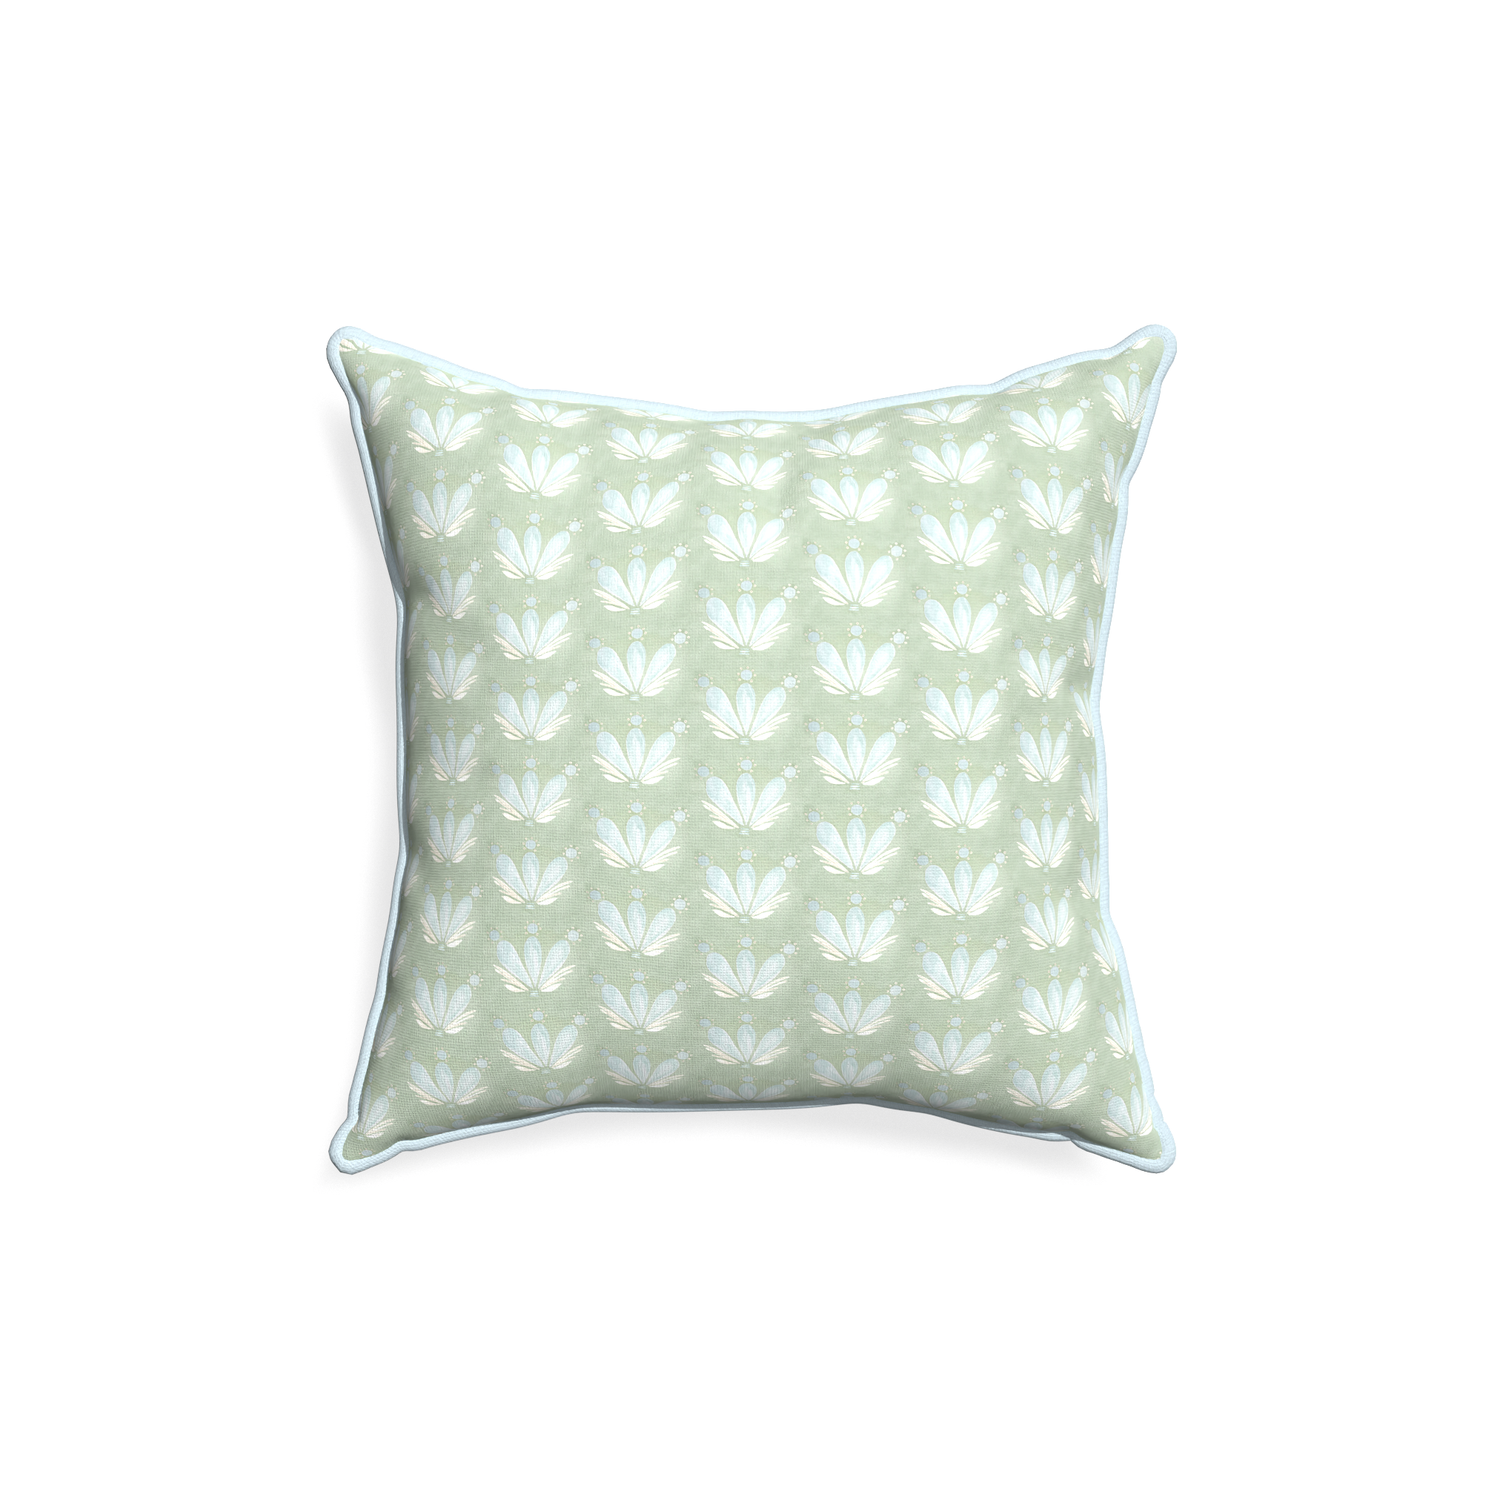 18-square serena sea salt custom pillow with powder piping on white background